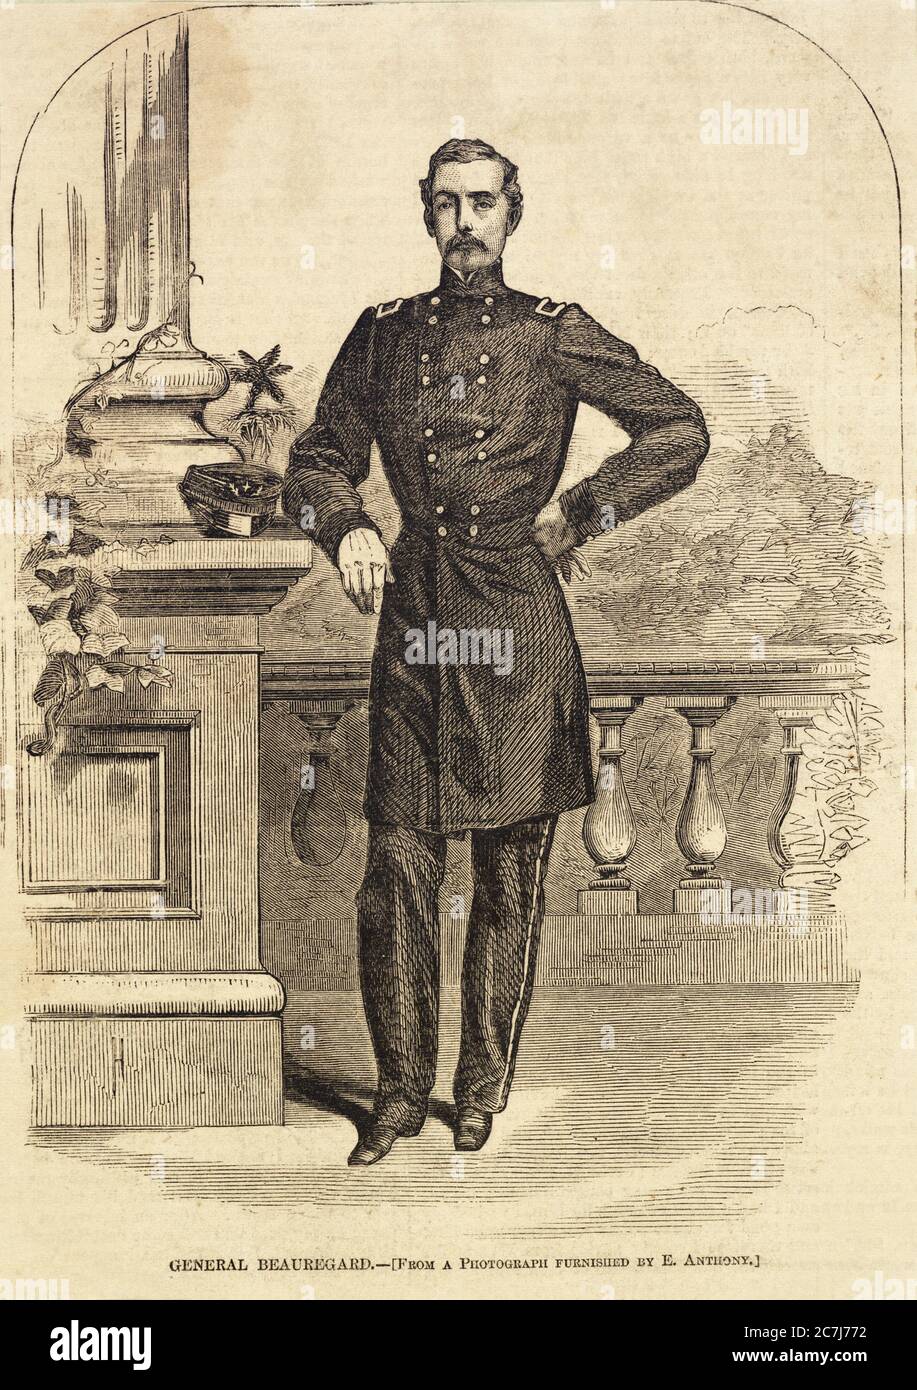 Pierre Gustave Toutant Beauregard, General, Confederate States Army, American Civil War, full-length Portrait, wearing Uniform, Illustration from a photograph by E. Anthony, Harper's Weekly, 1861 Stock Photo